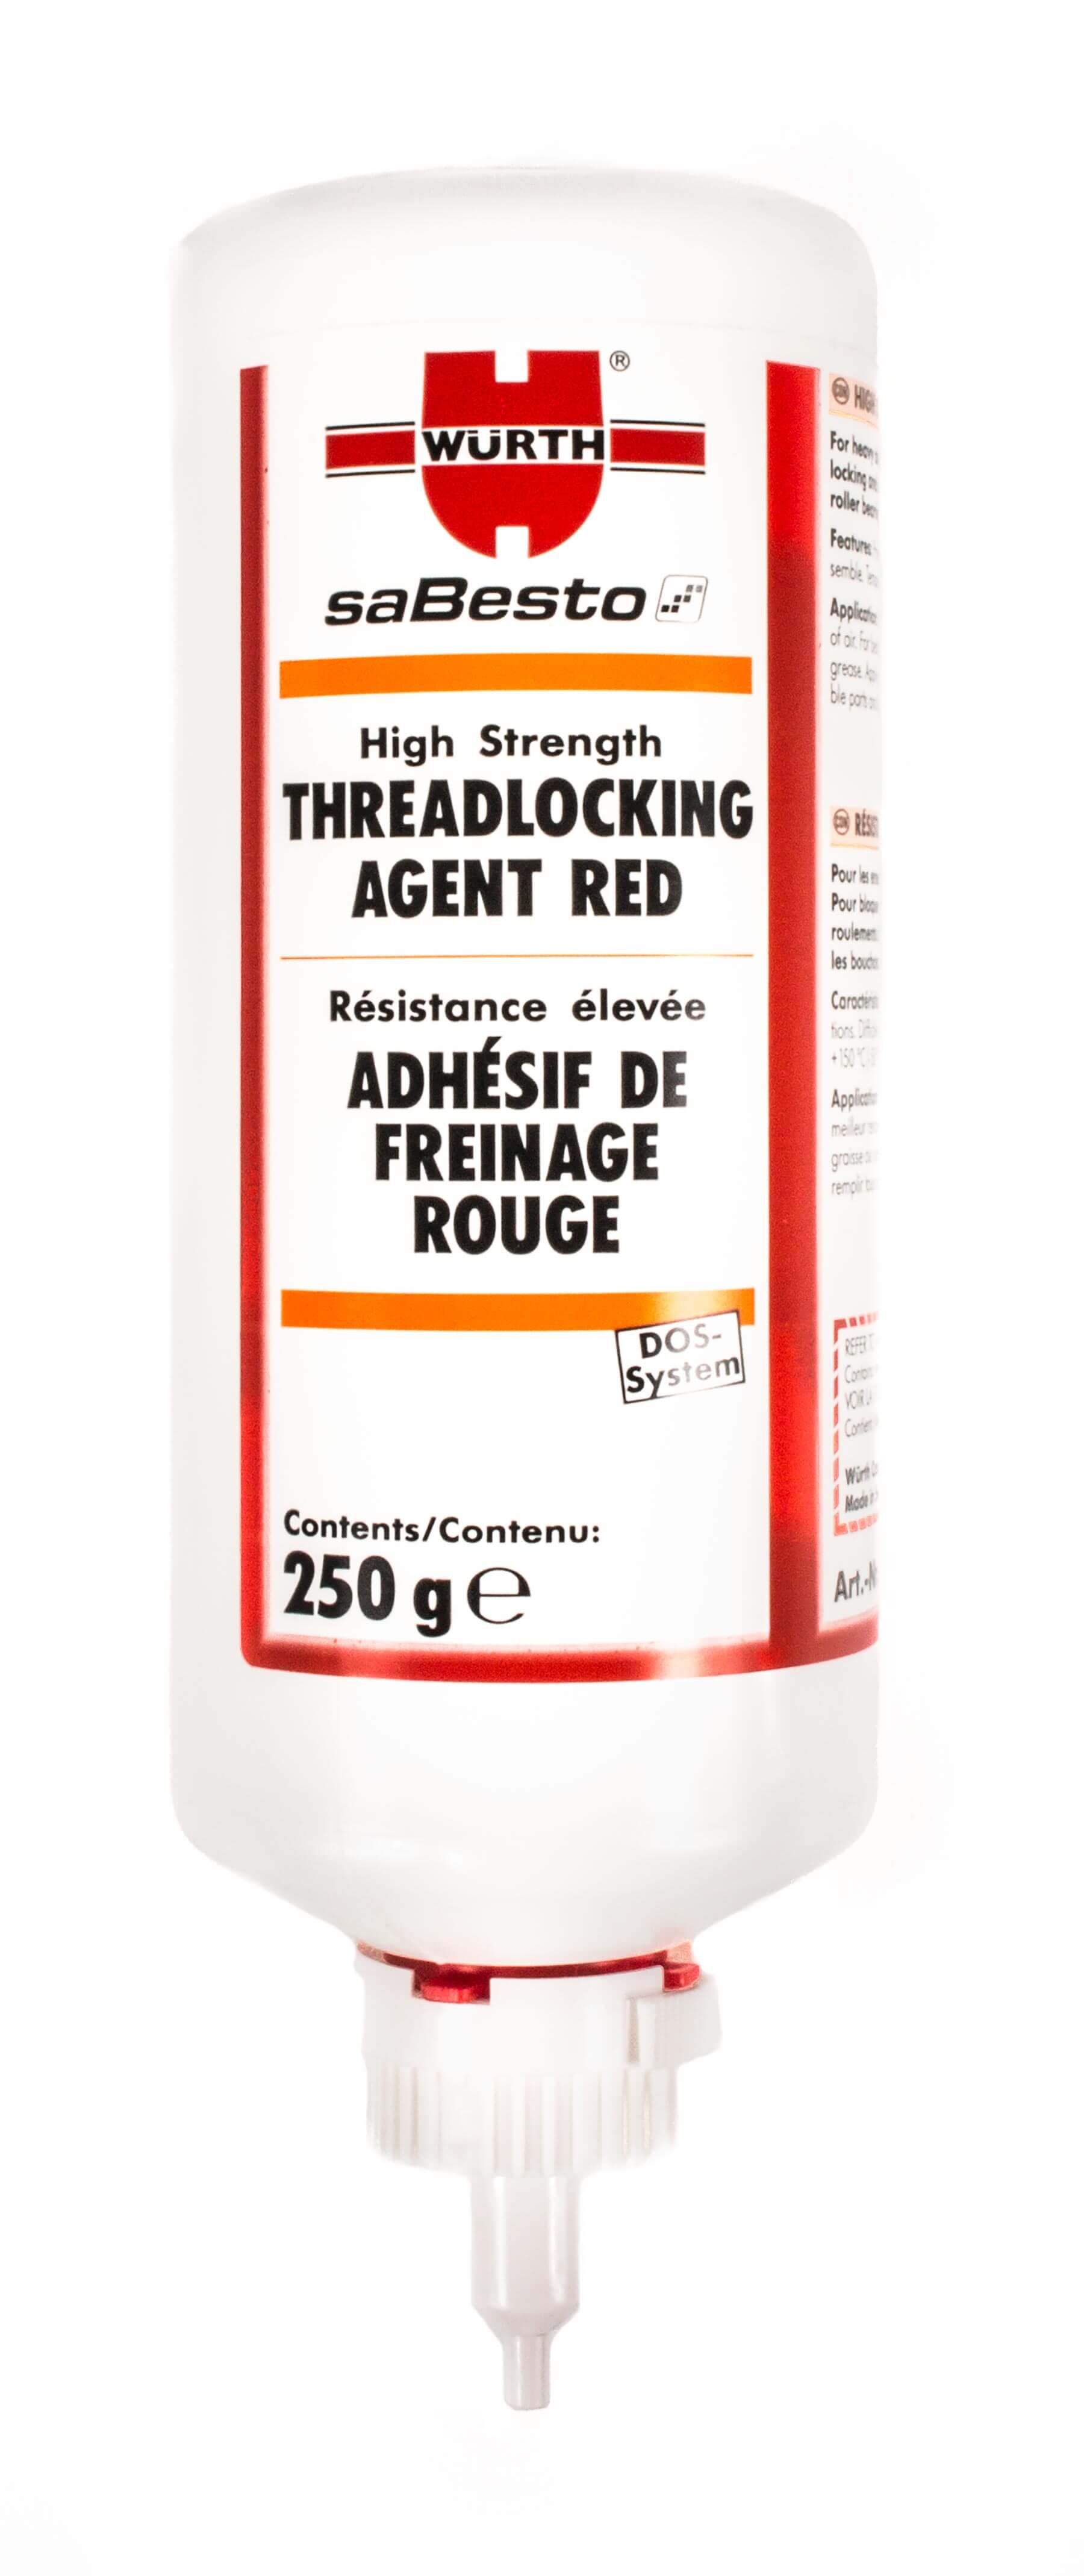 RED THREADLOCK HIGH STRENGTH V: 2400 CPS at 25° 50ML, Canada